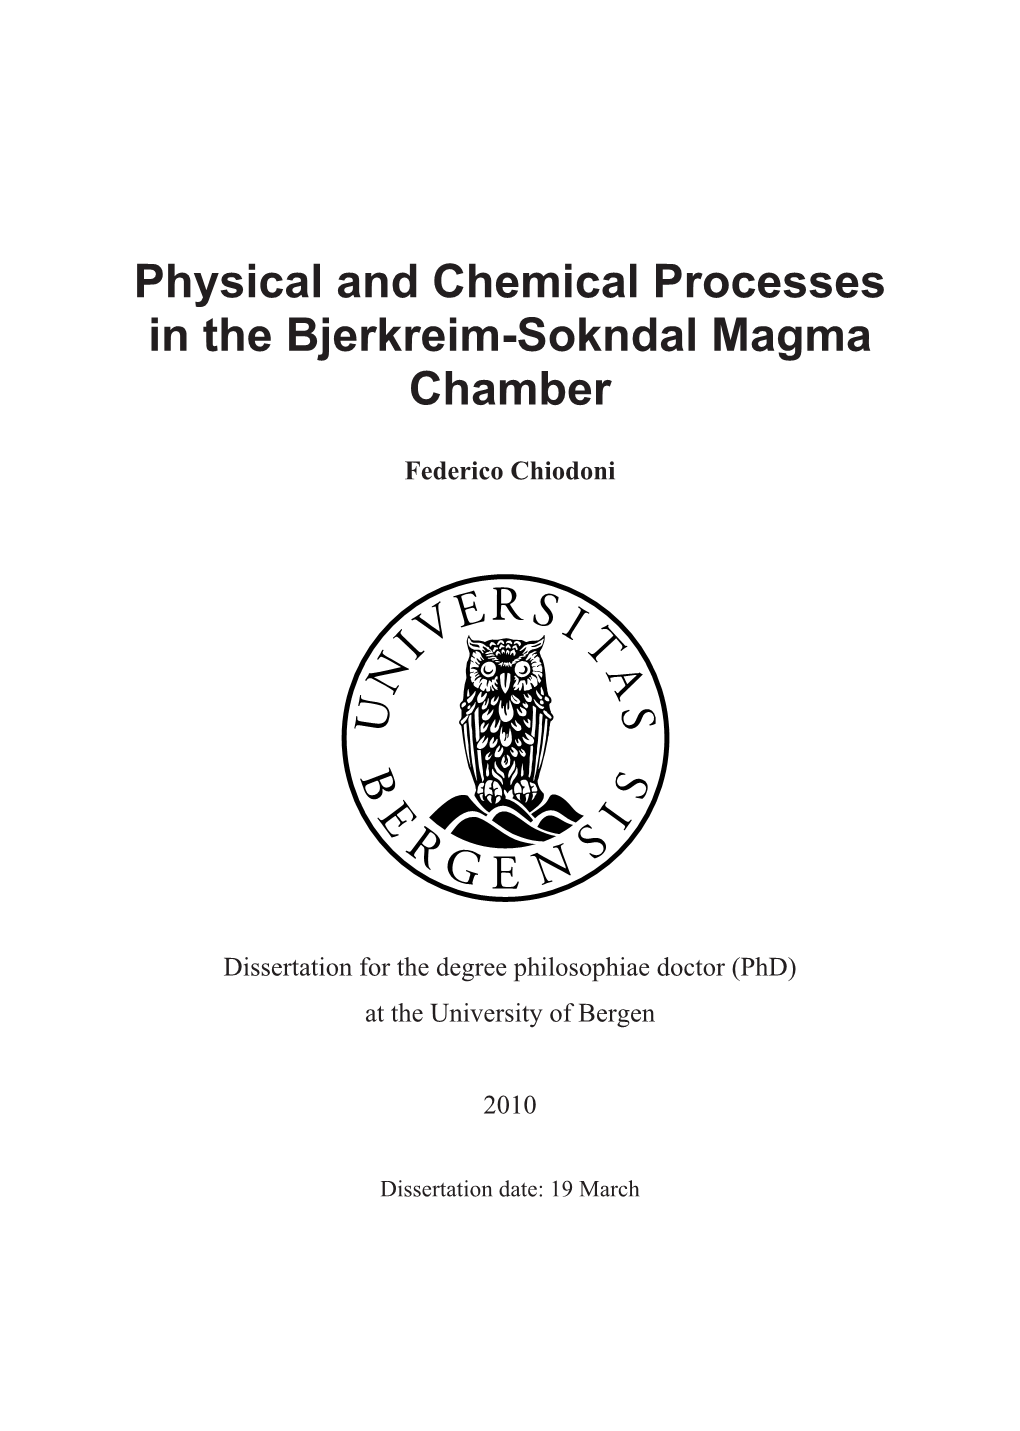 Physical and Chemical Processes in the Bjerkreim-Sokndal Magma Chamber